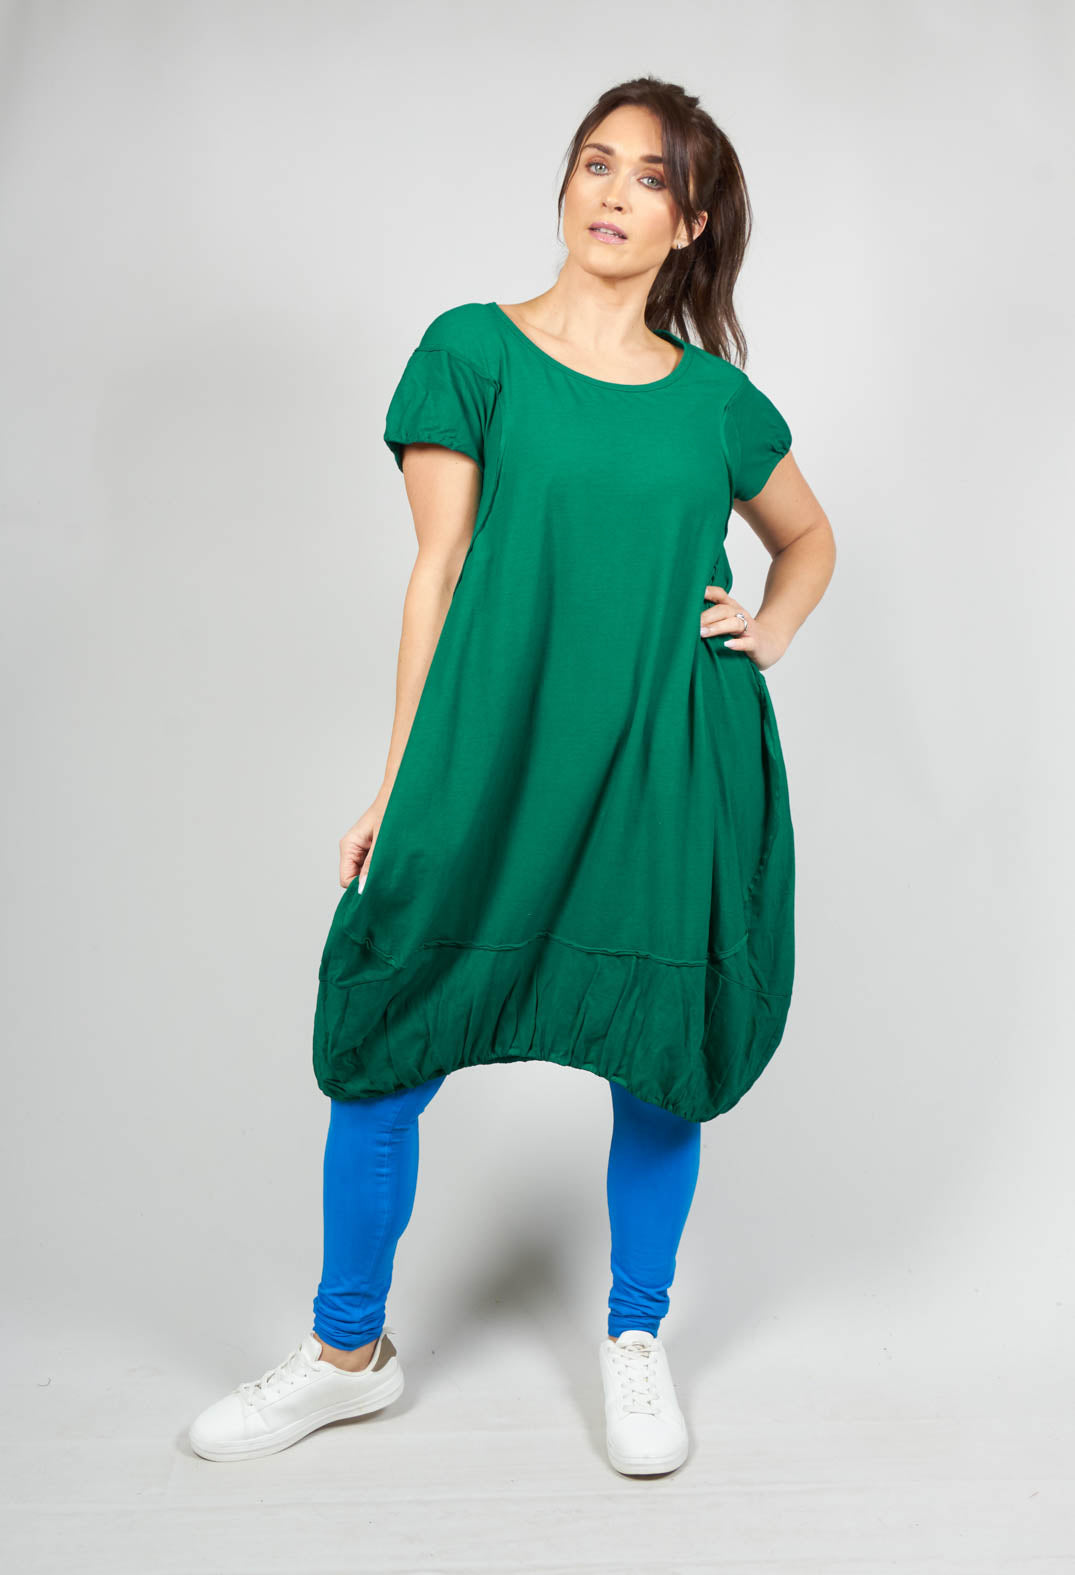 lady wearing a short sleeved jersey dress with a gathered hem in green